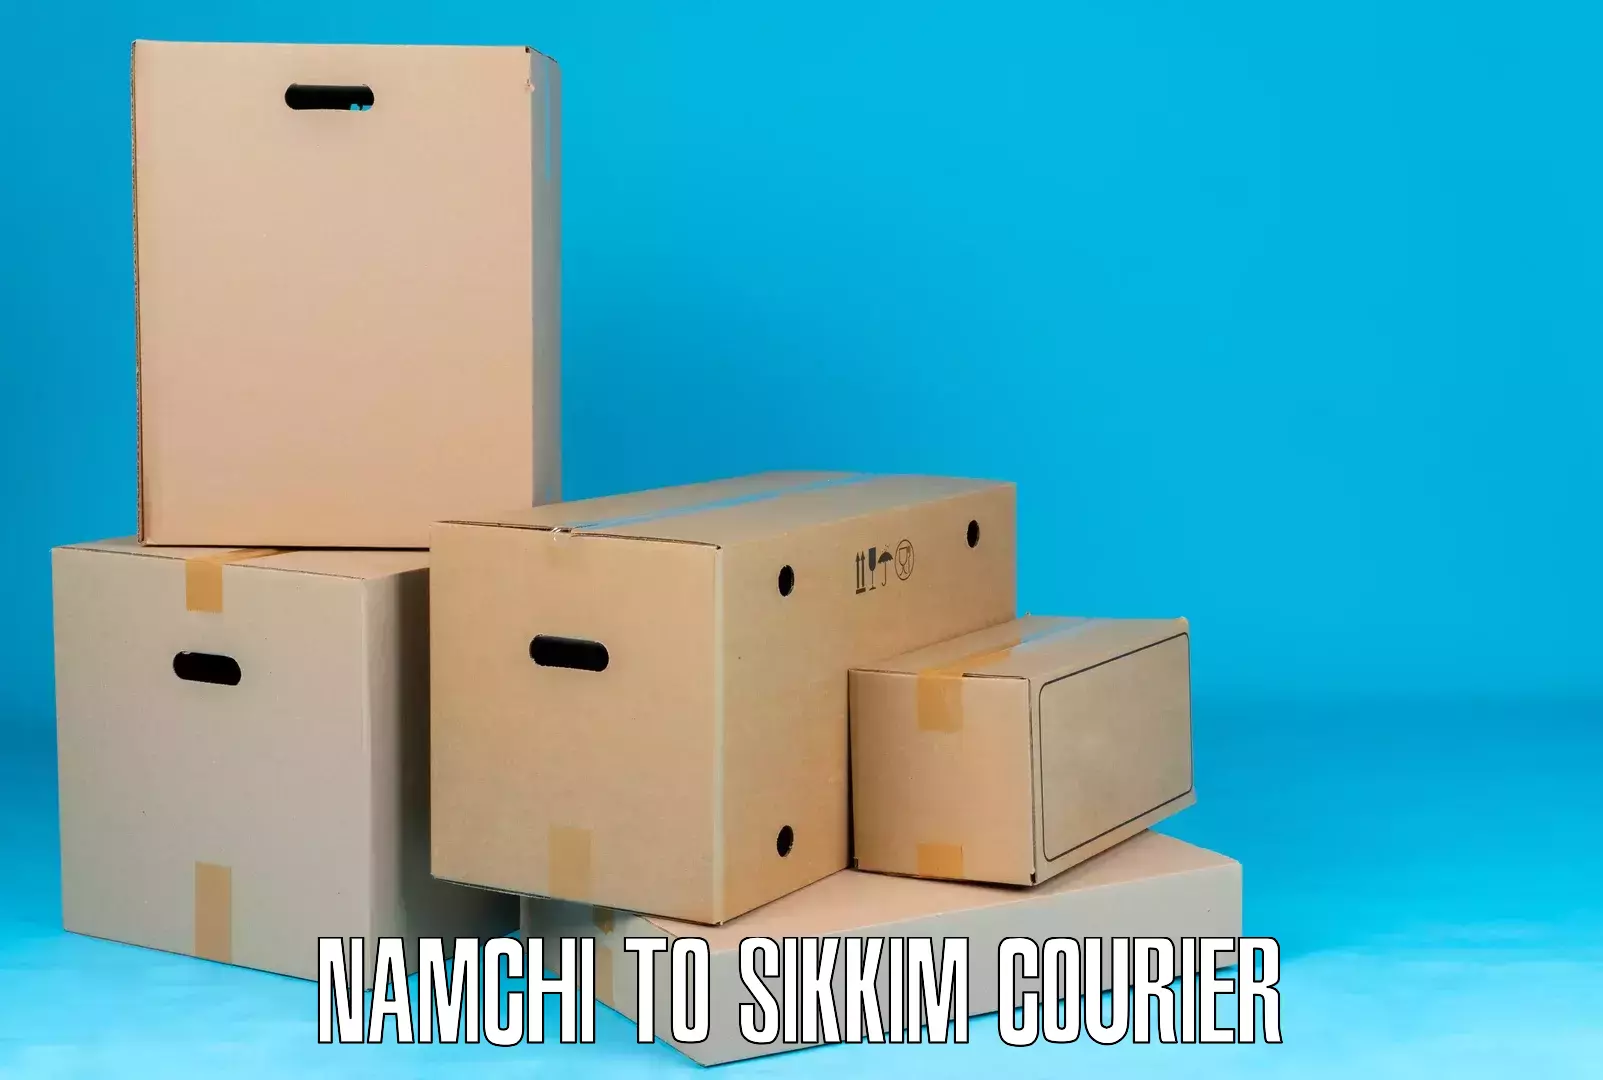 Online shipping calculator Namchi to East Sikkim